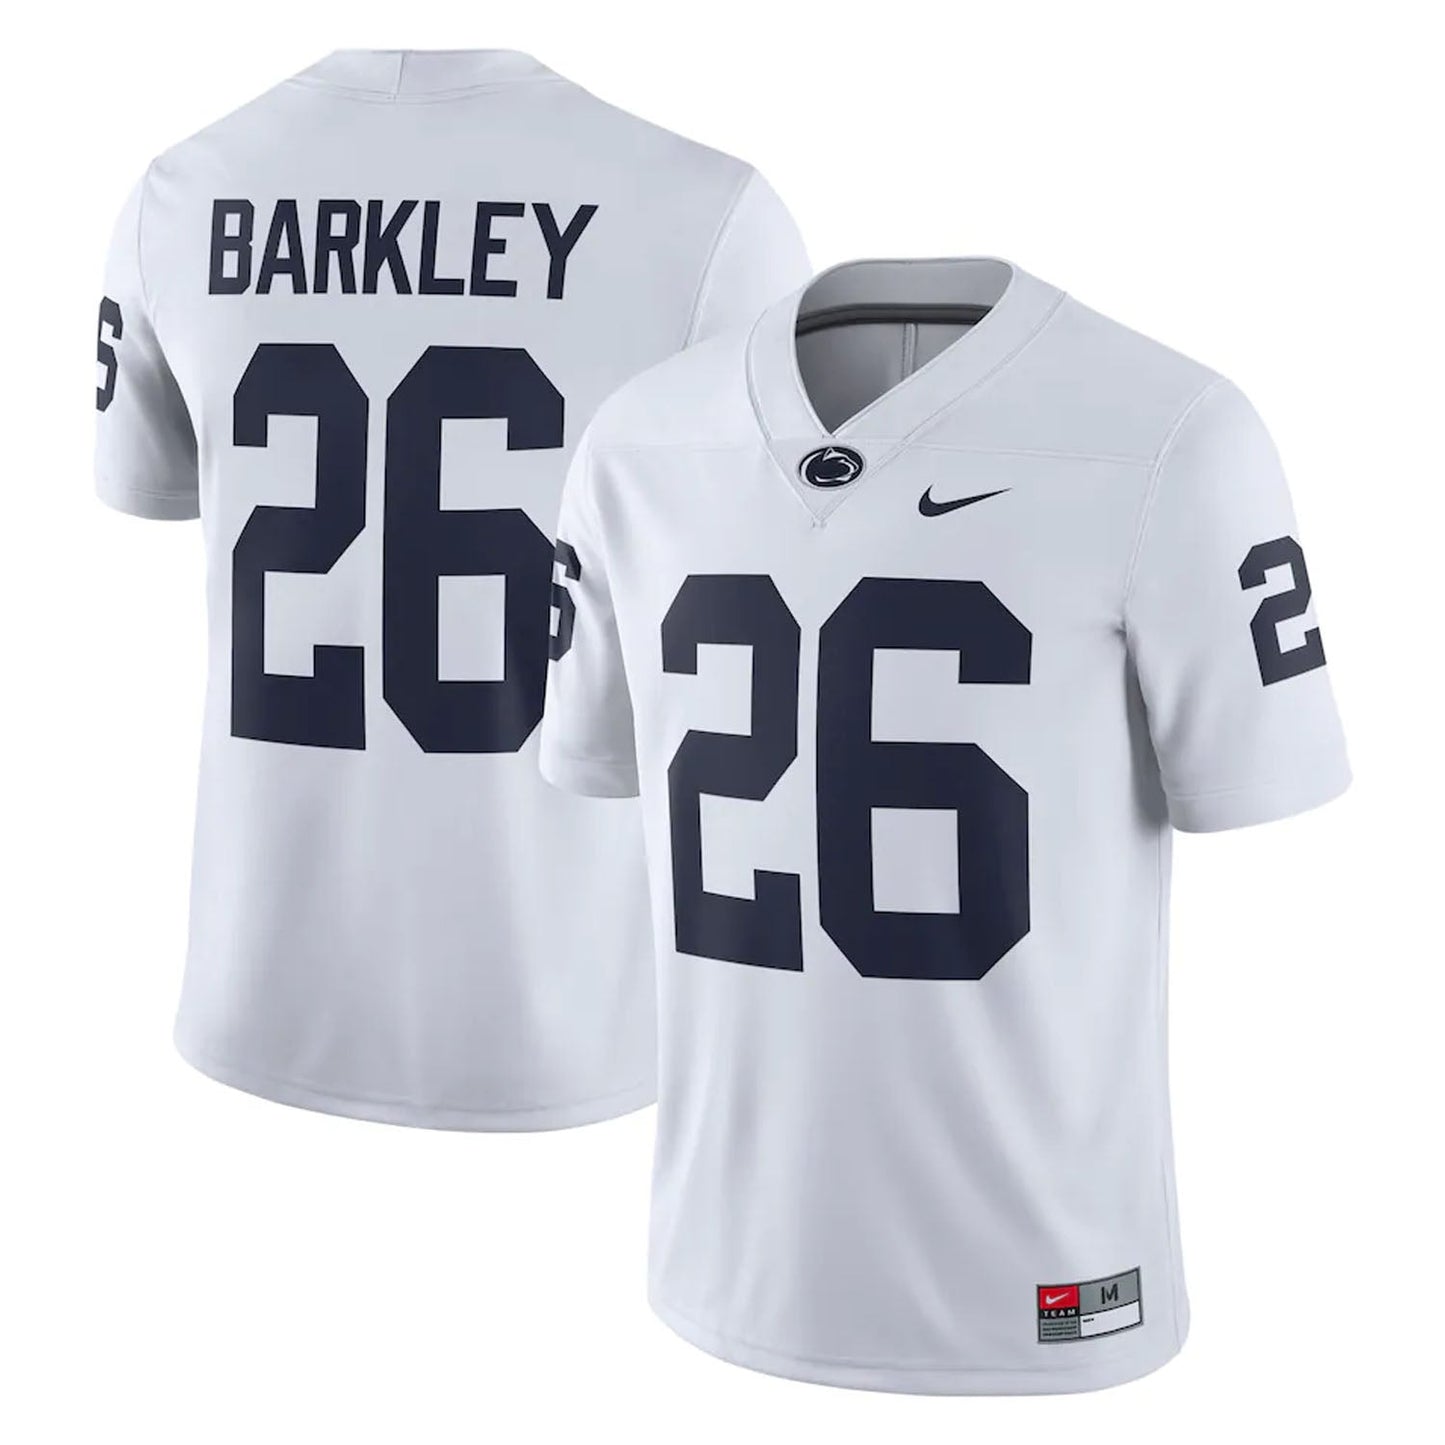 NCAAF Saquon Barkley Penn State Nittany Lions 26 Jersey